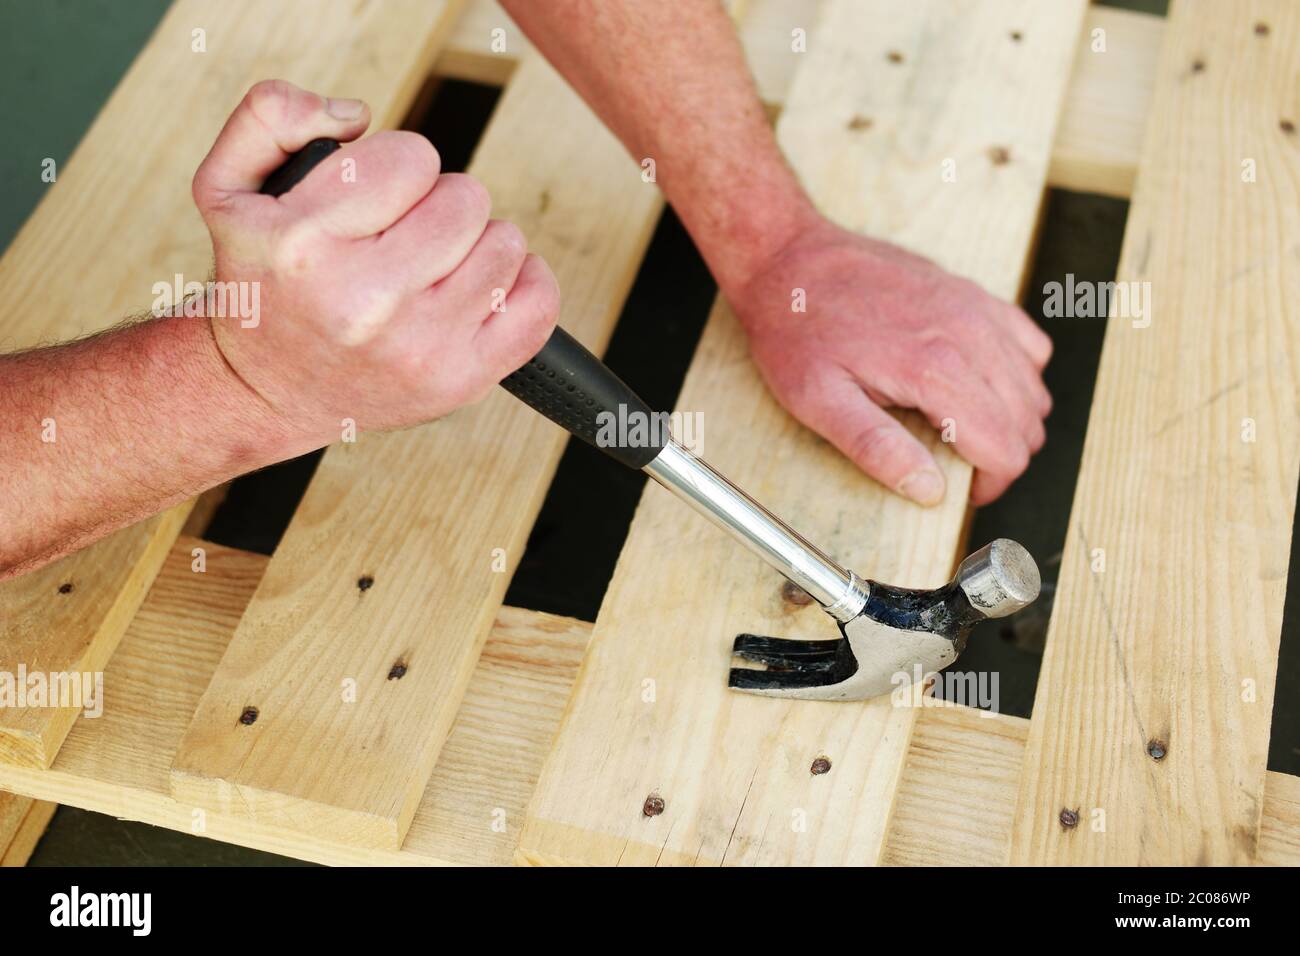 Carpenter using a claw hammer Stock Photo